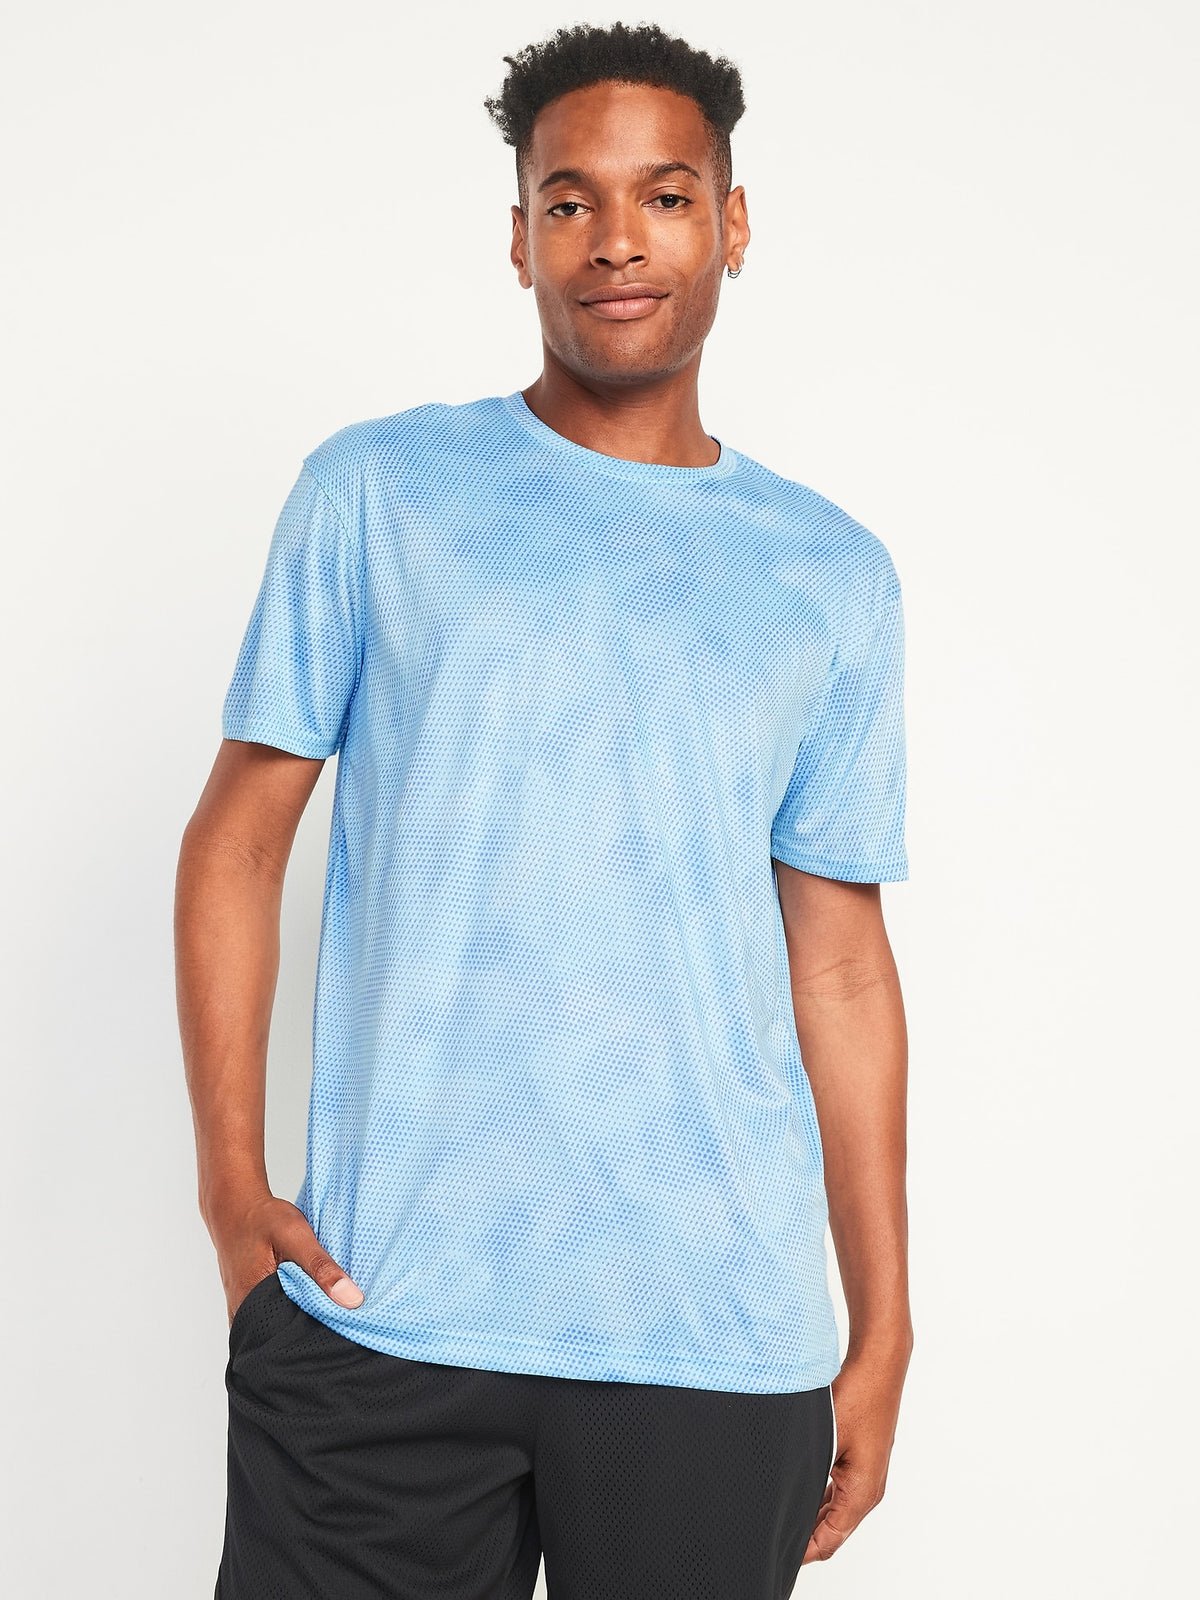 Go-Dry Cool Odor-Control Printed Core T-Shirt for Men_NewYorkSkyBlue_1250.jpeg